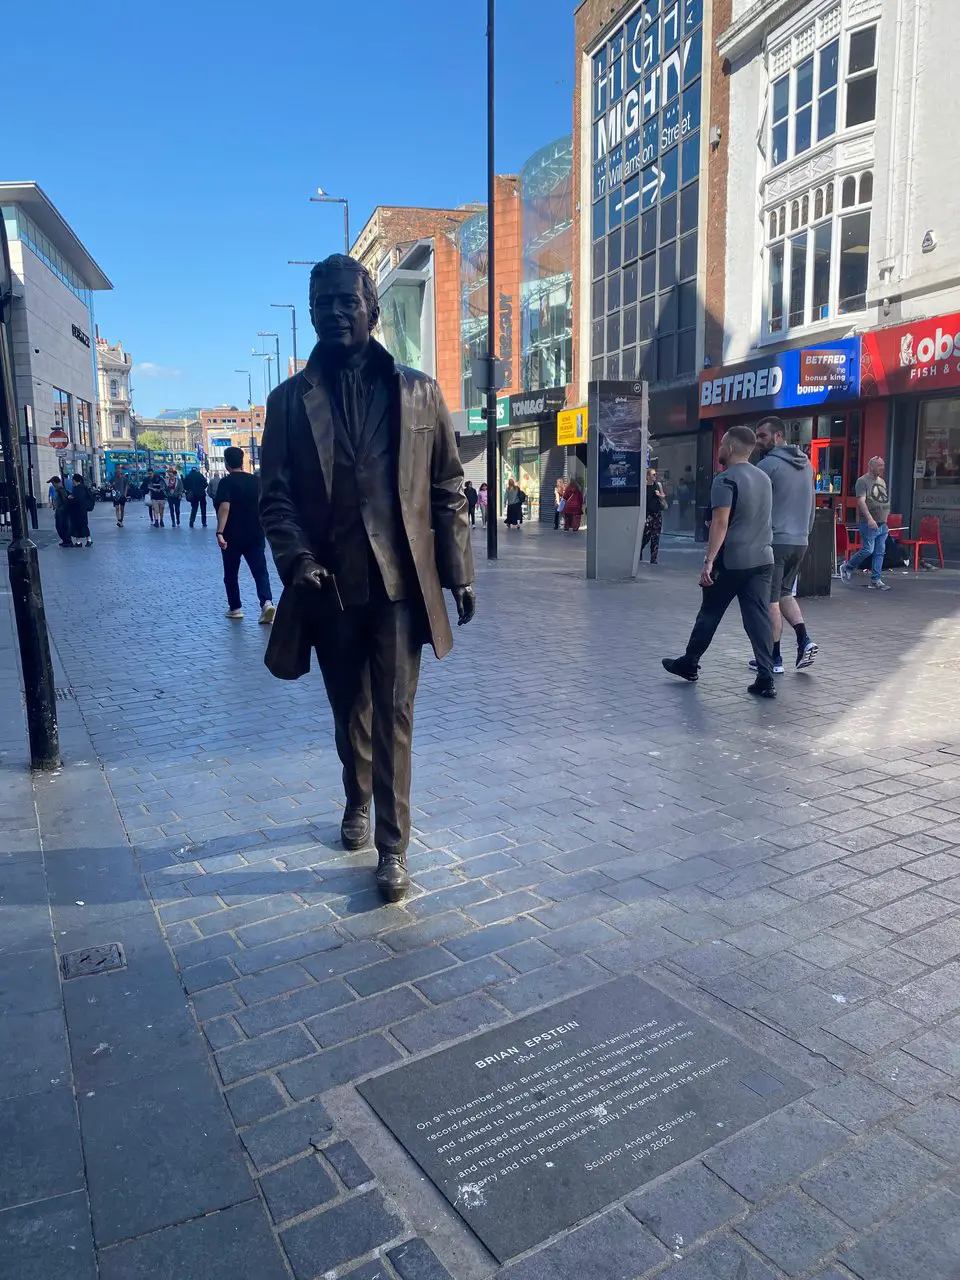 Bronze statue of Beatles manager Brian Epstein on a street in Liverpool England